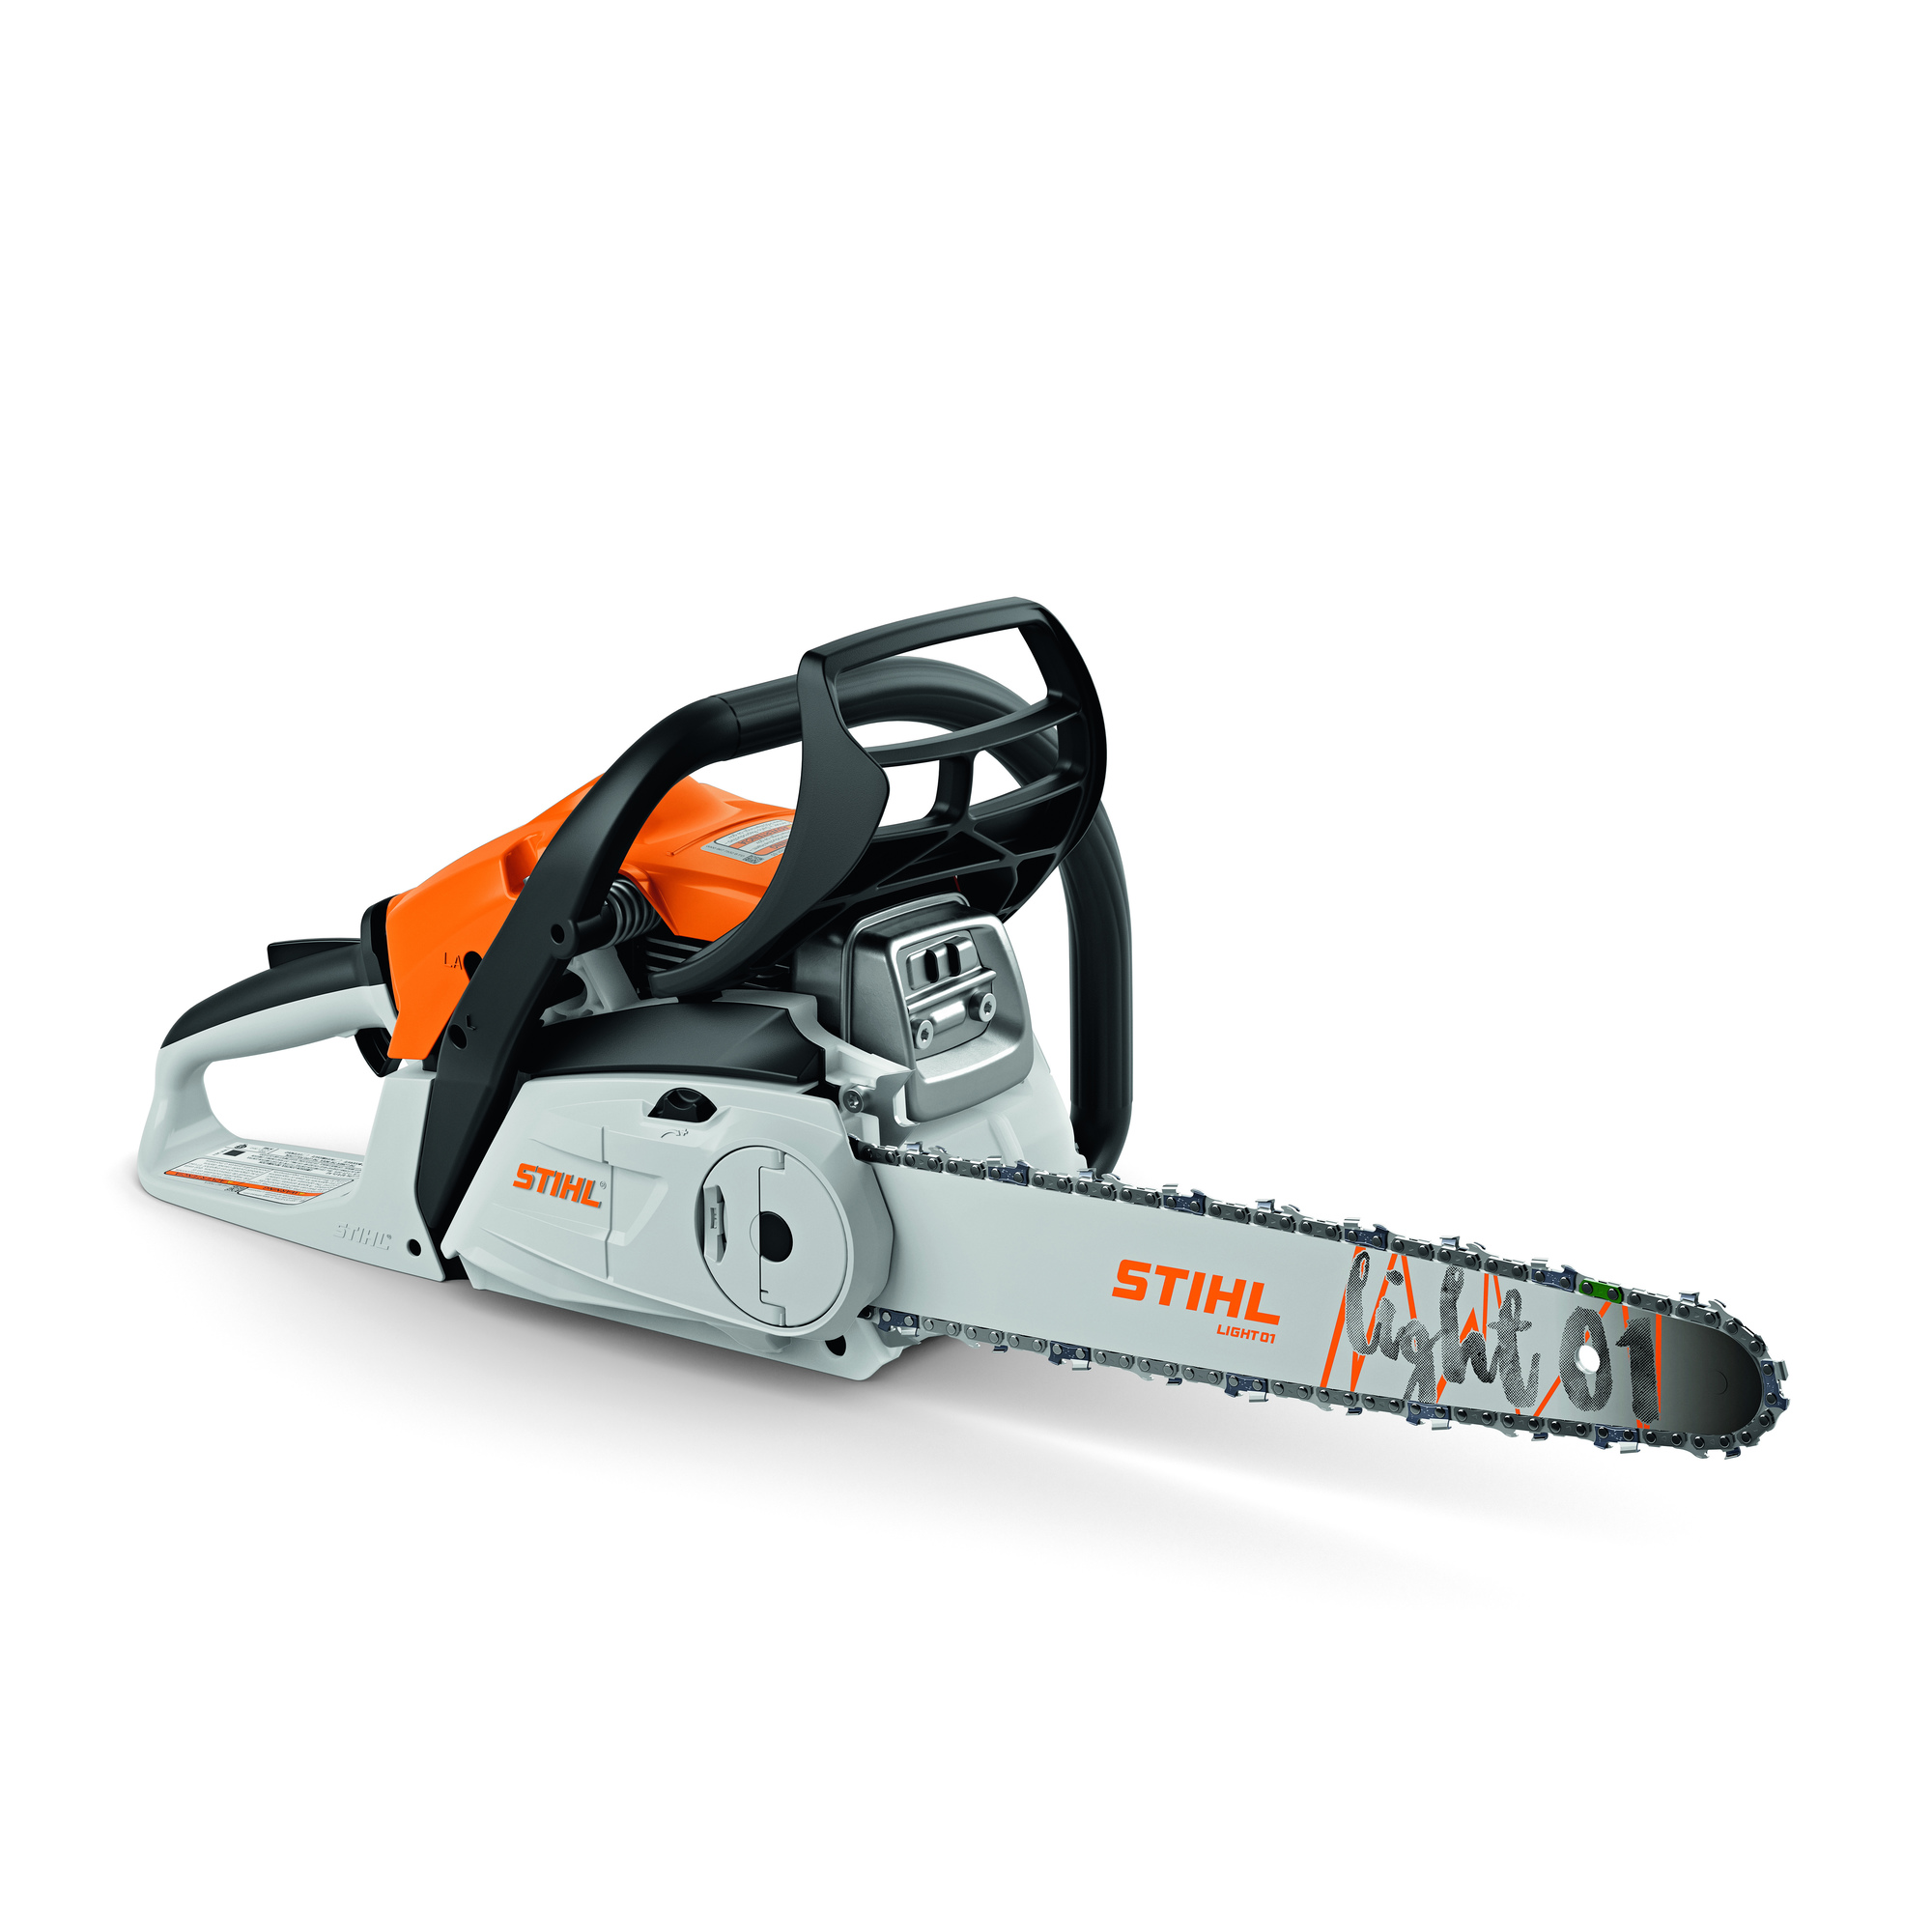 Stihl, Gasoline Powered Chain Saw, Bar Length 16 in, Engine Displacement 31.8 cc, Model MS 172 C-E